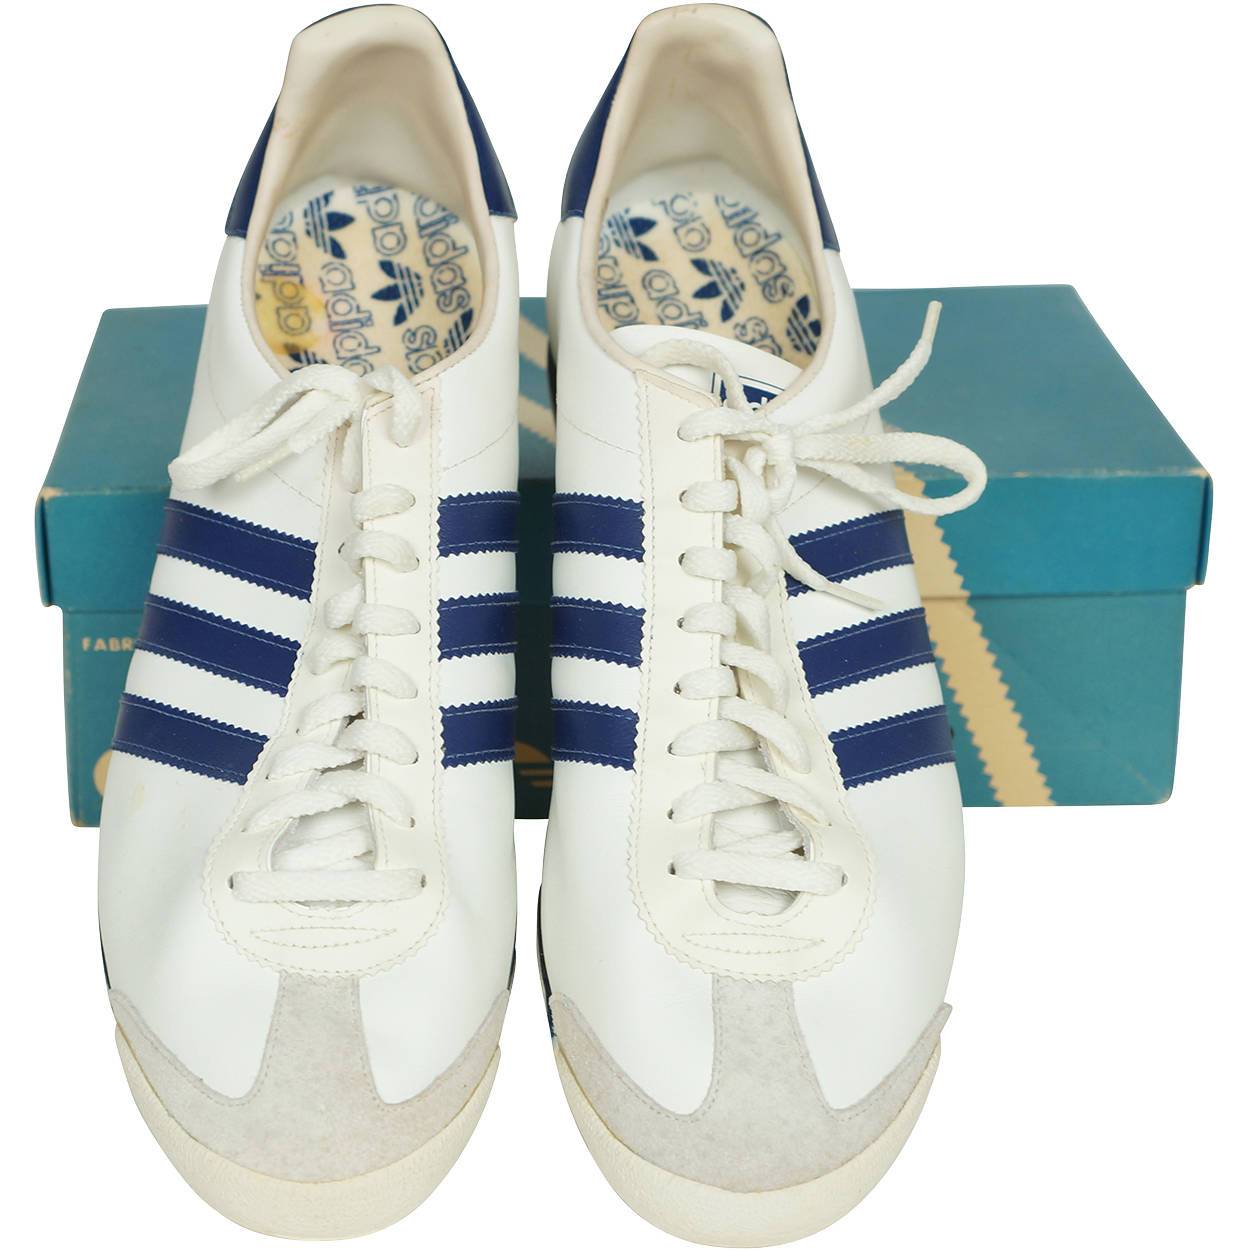 adidas 70's running shoes